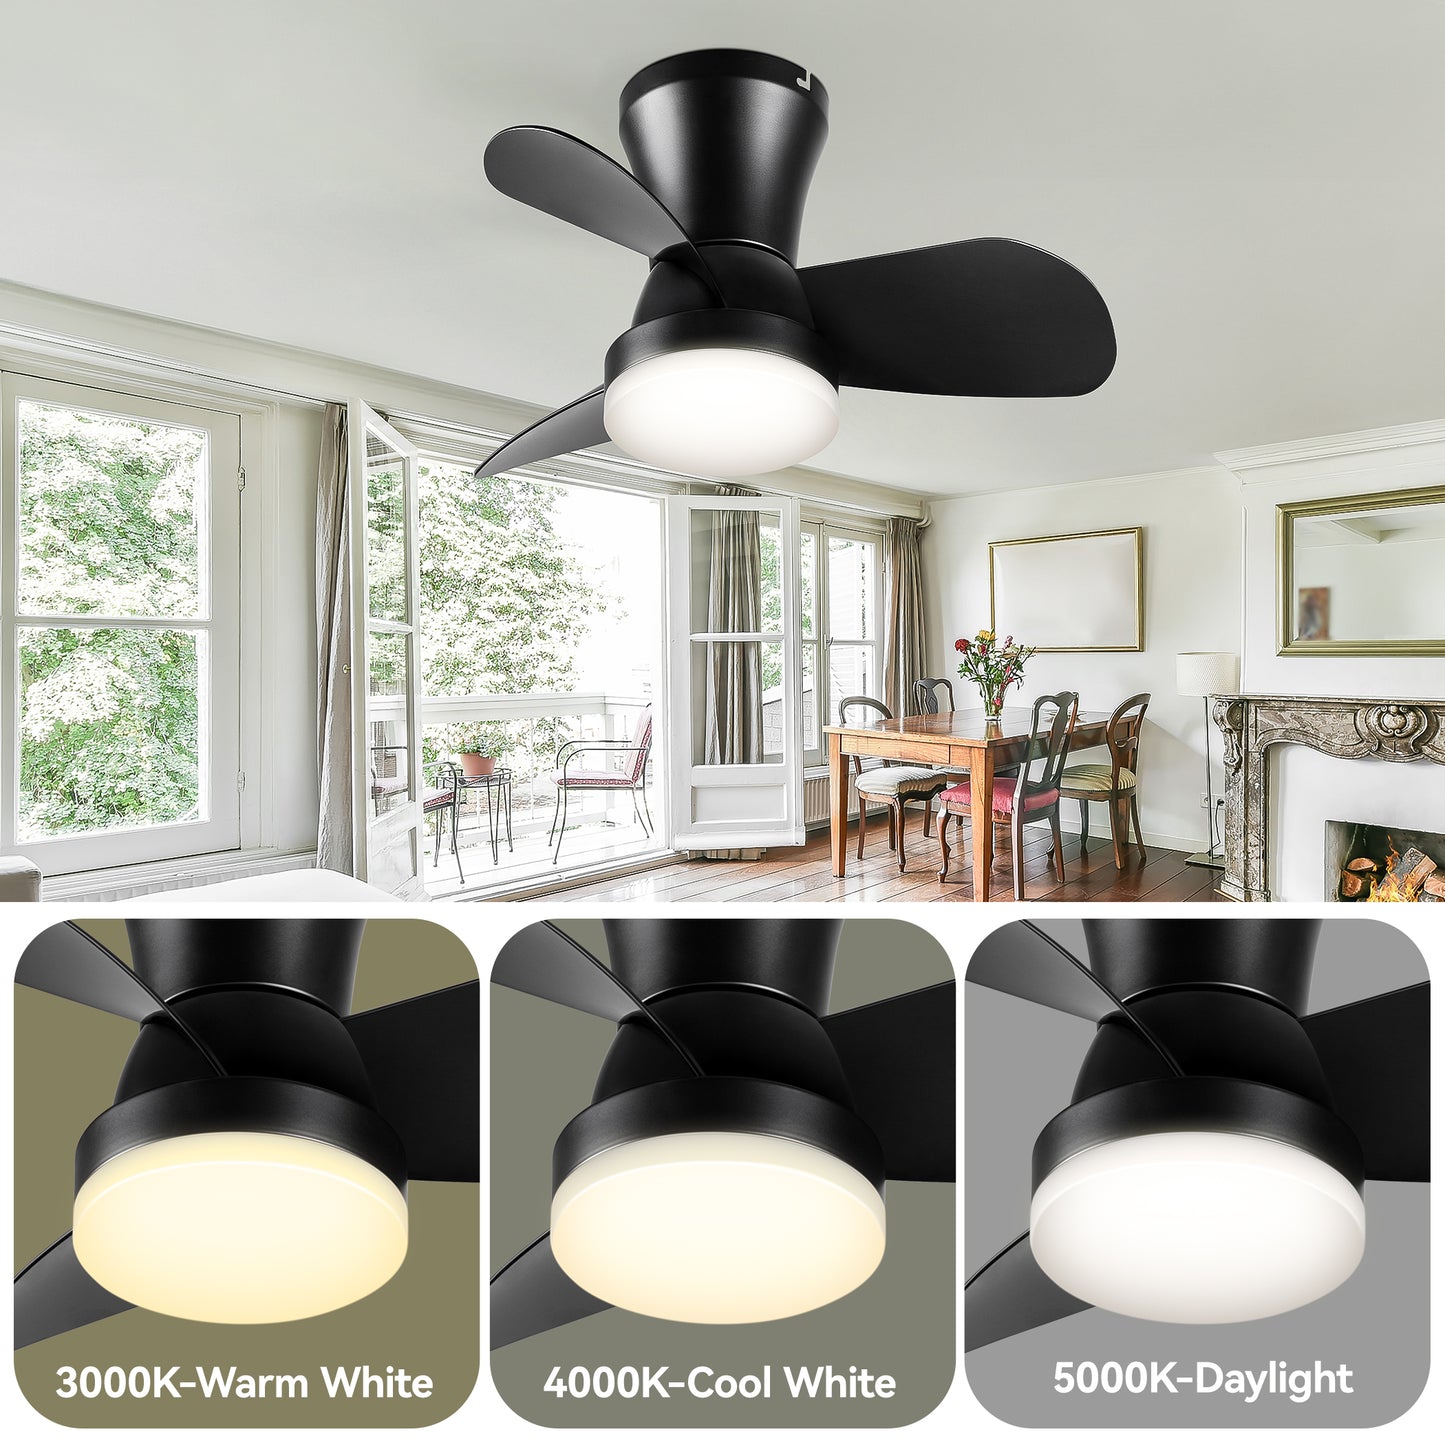 SUNMORY 22 inch Ceiling Fans with Lights and Remote, Low Profile Ceiling Fan for Bedroom/Kitchen/Dining Room/Patio, 6 Wind Speeds, Dimmable, White